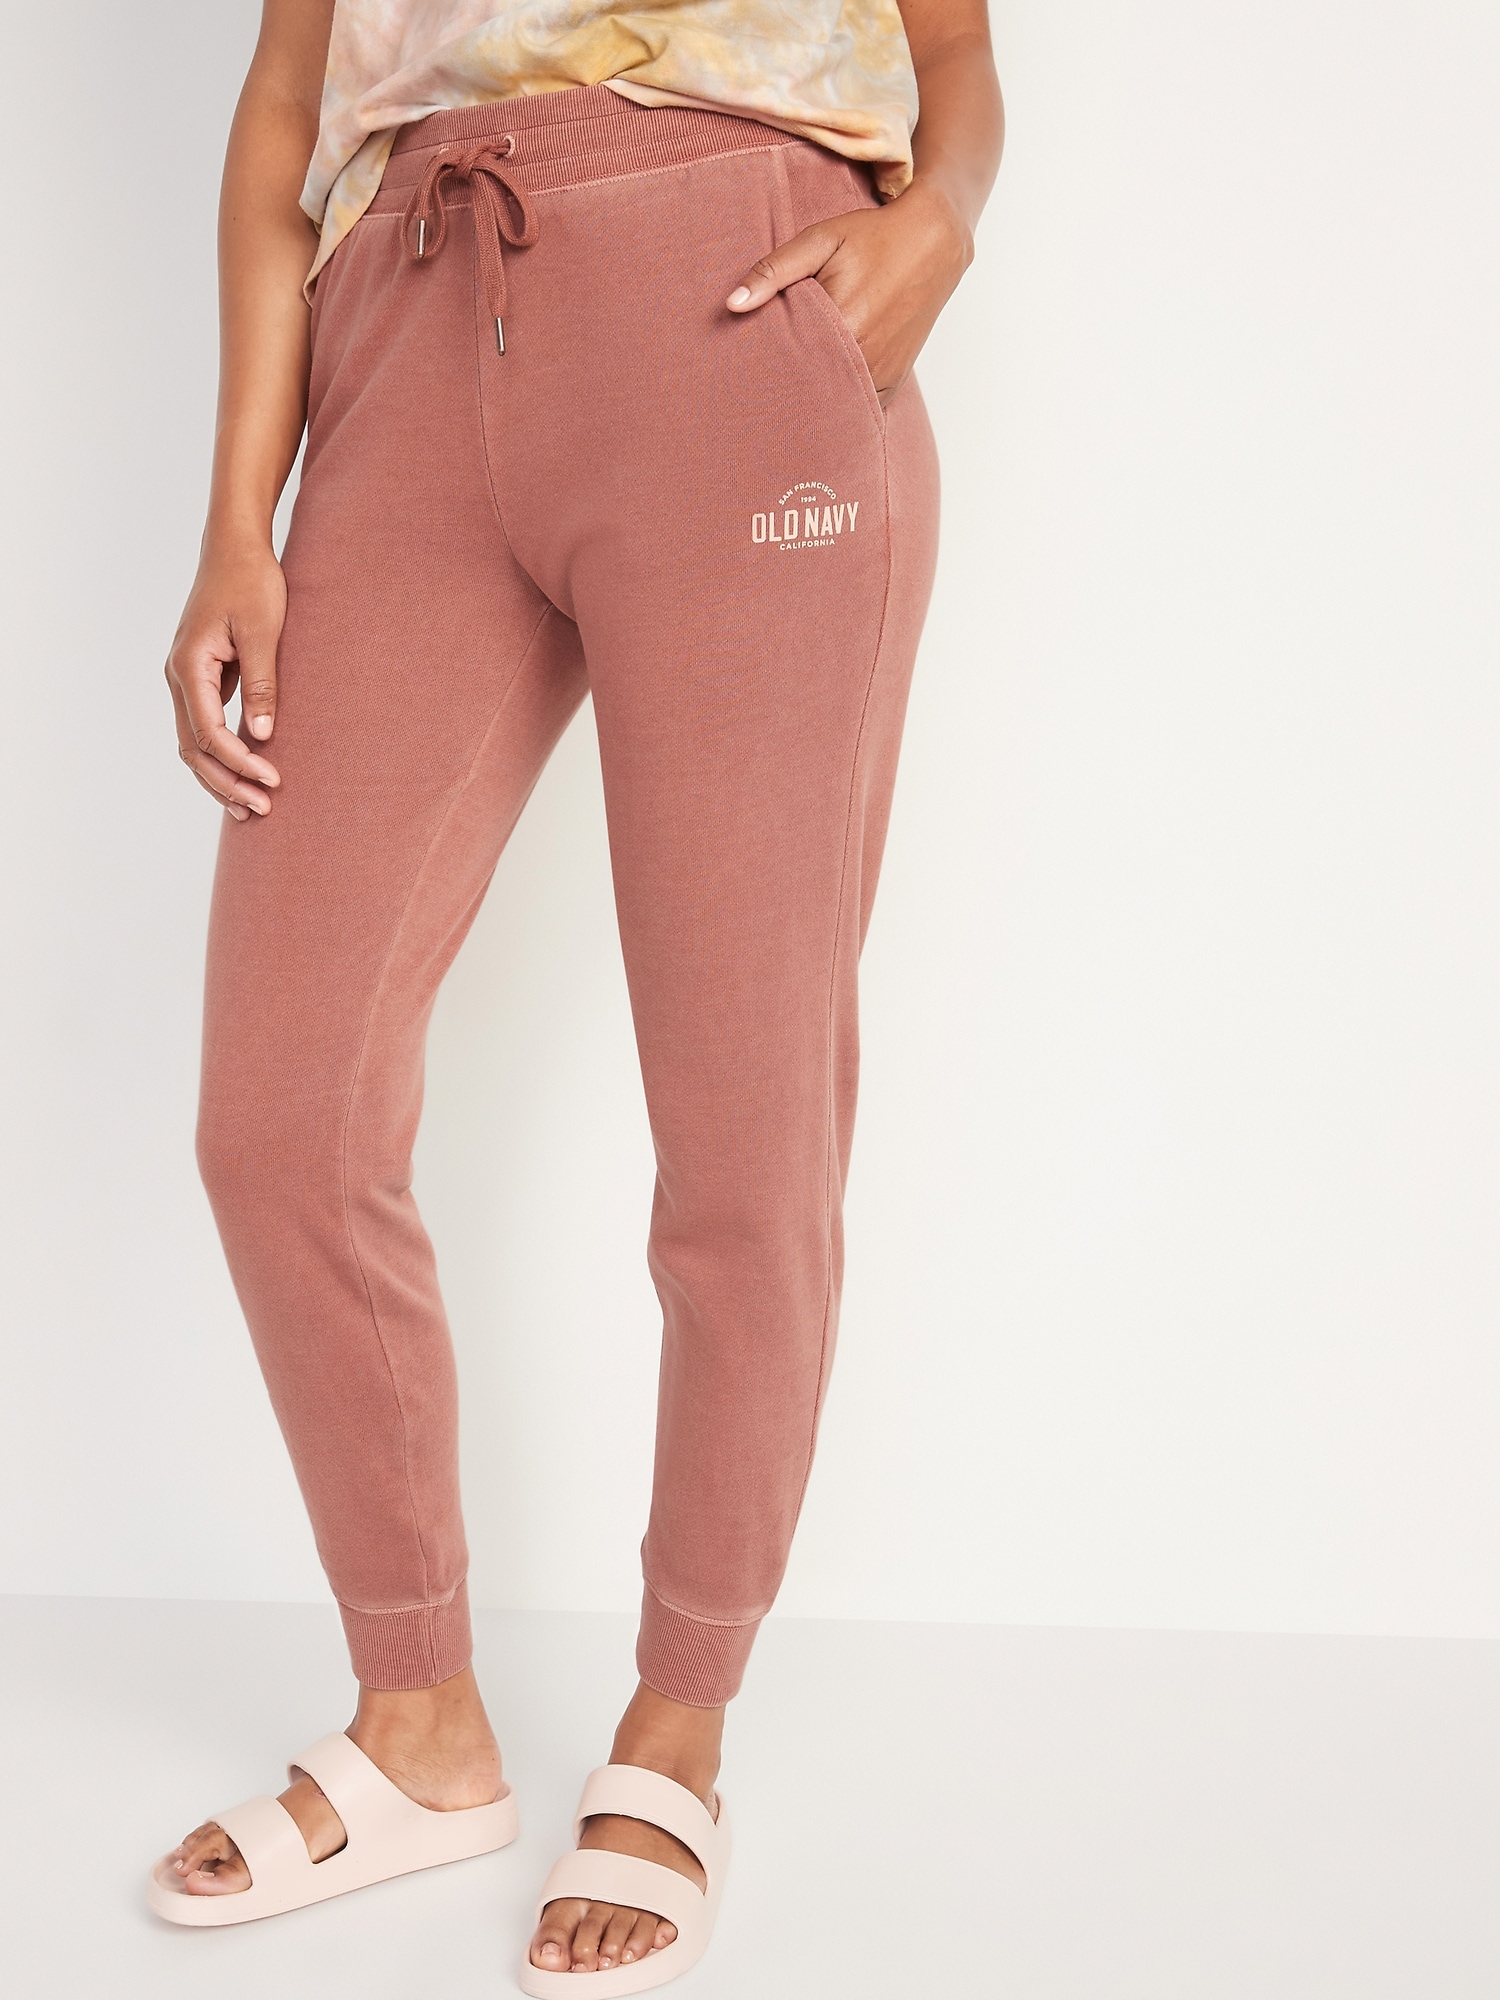 Logo-Graphic Jogger Pants for Women, Old Navy